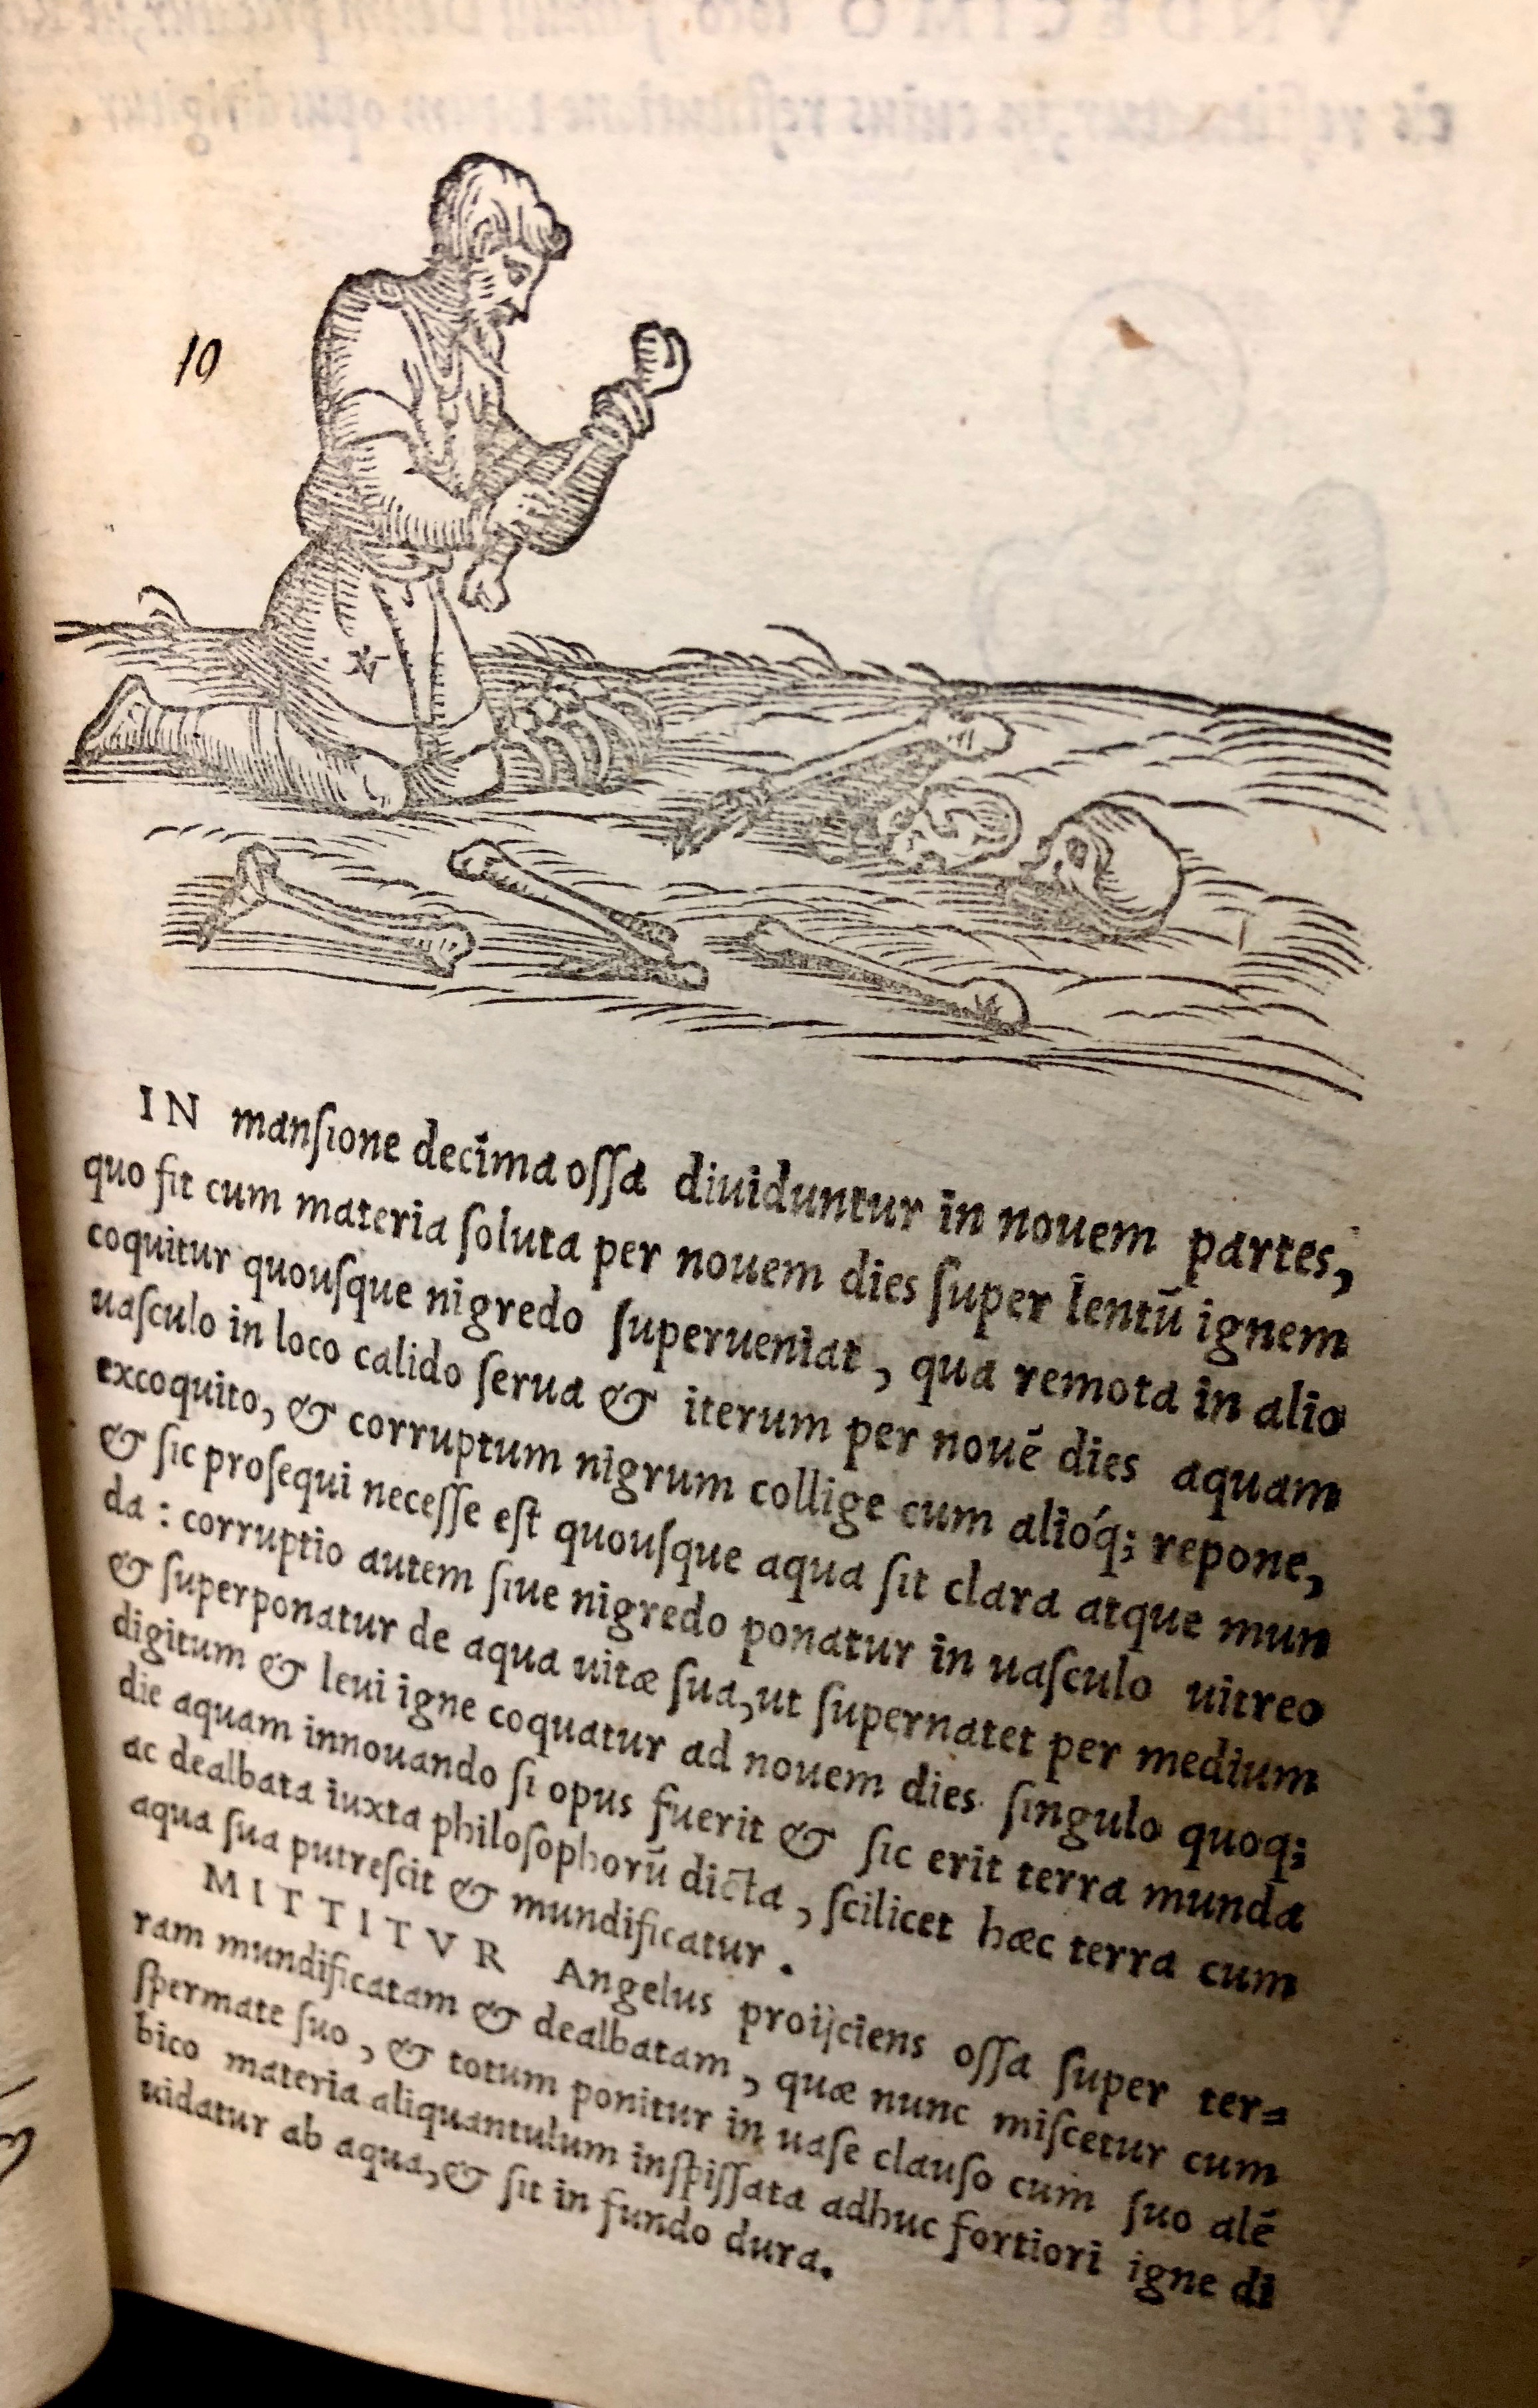 Step ten: [Complex instructions for turning  bones into purified water, involving subjecting some to heat until they turn black and repeating this until water is acquired]  From 'Pretiosa margarita : novella de thesauro, ac pretiosissimo philosophorum lapide' by Giano Lacinio, 1546, Venice. (Maddison Collection 2B7, F10528400)